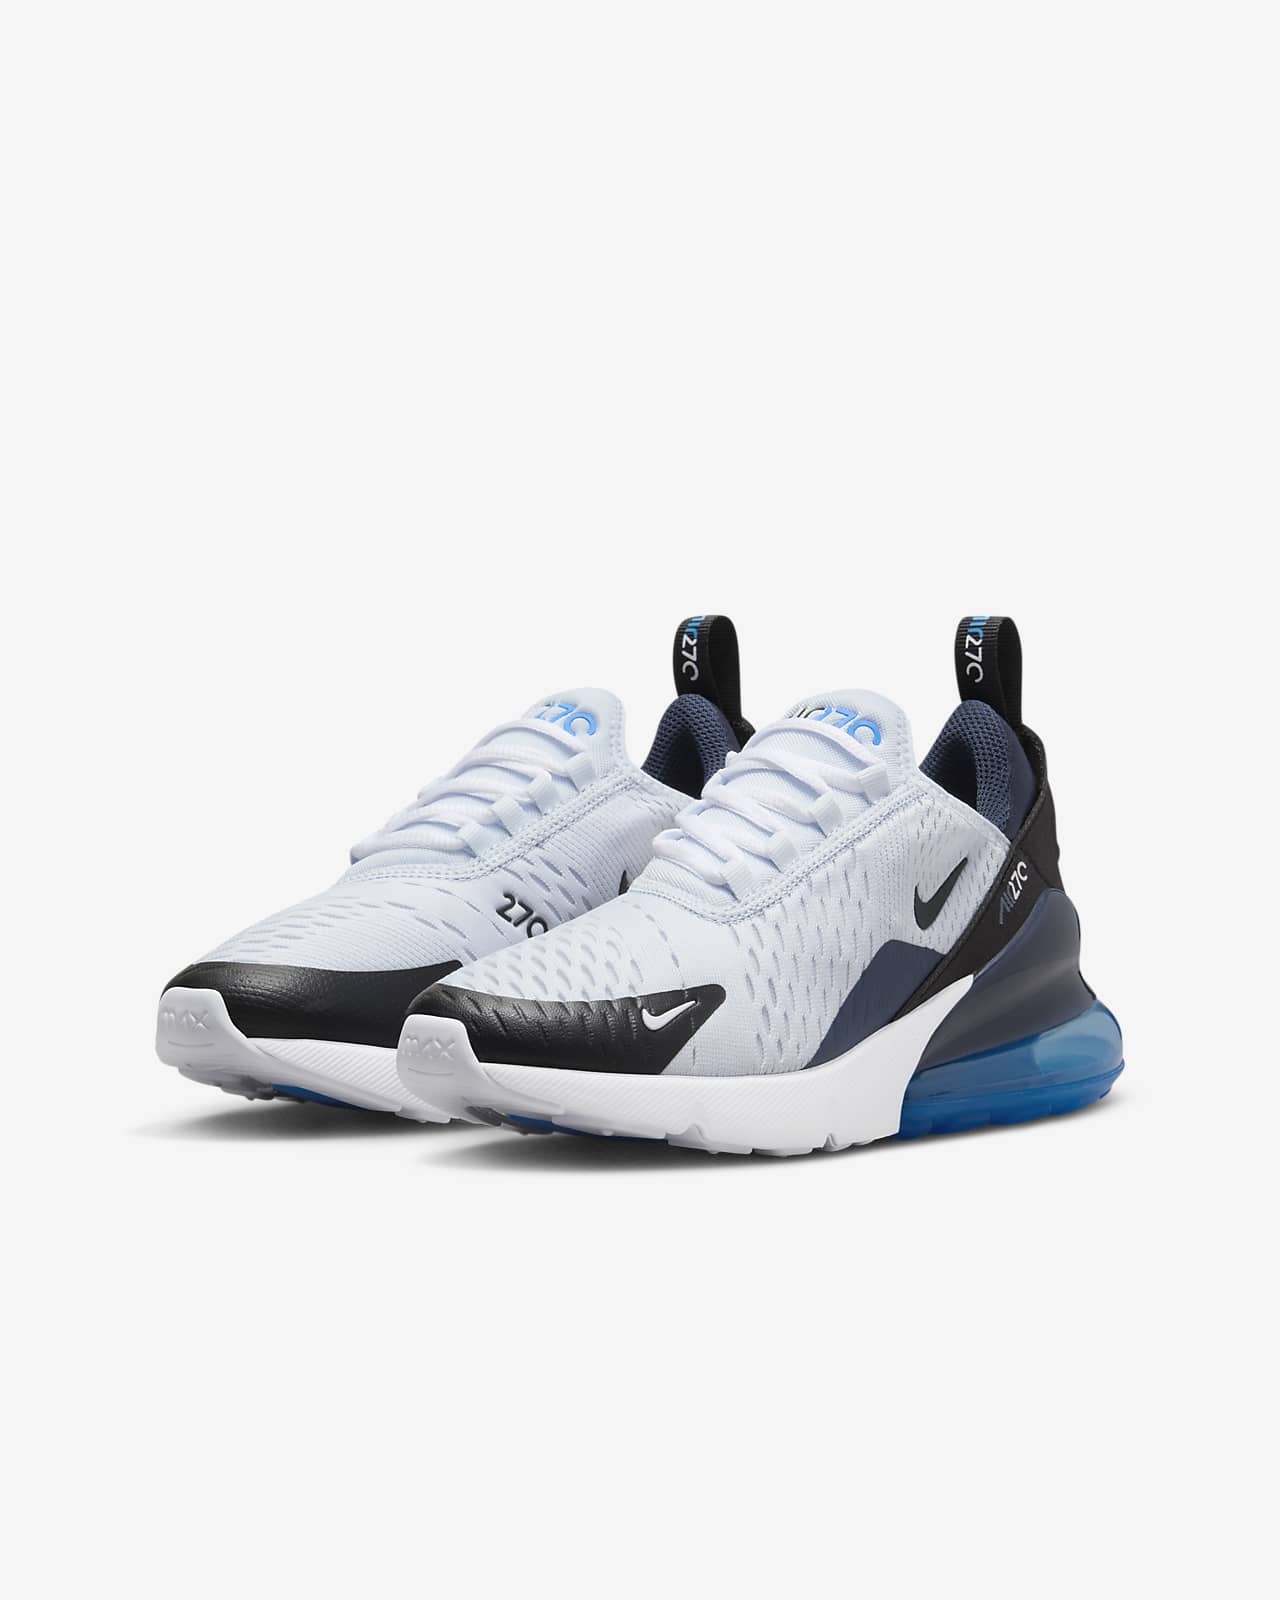 Stylish and Comfortable Men's Nike Free Shoes on Sale